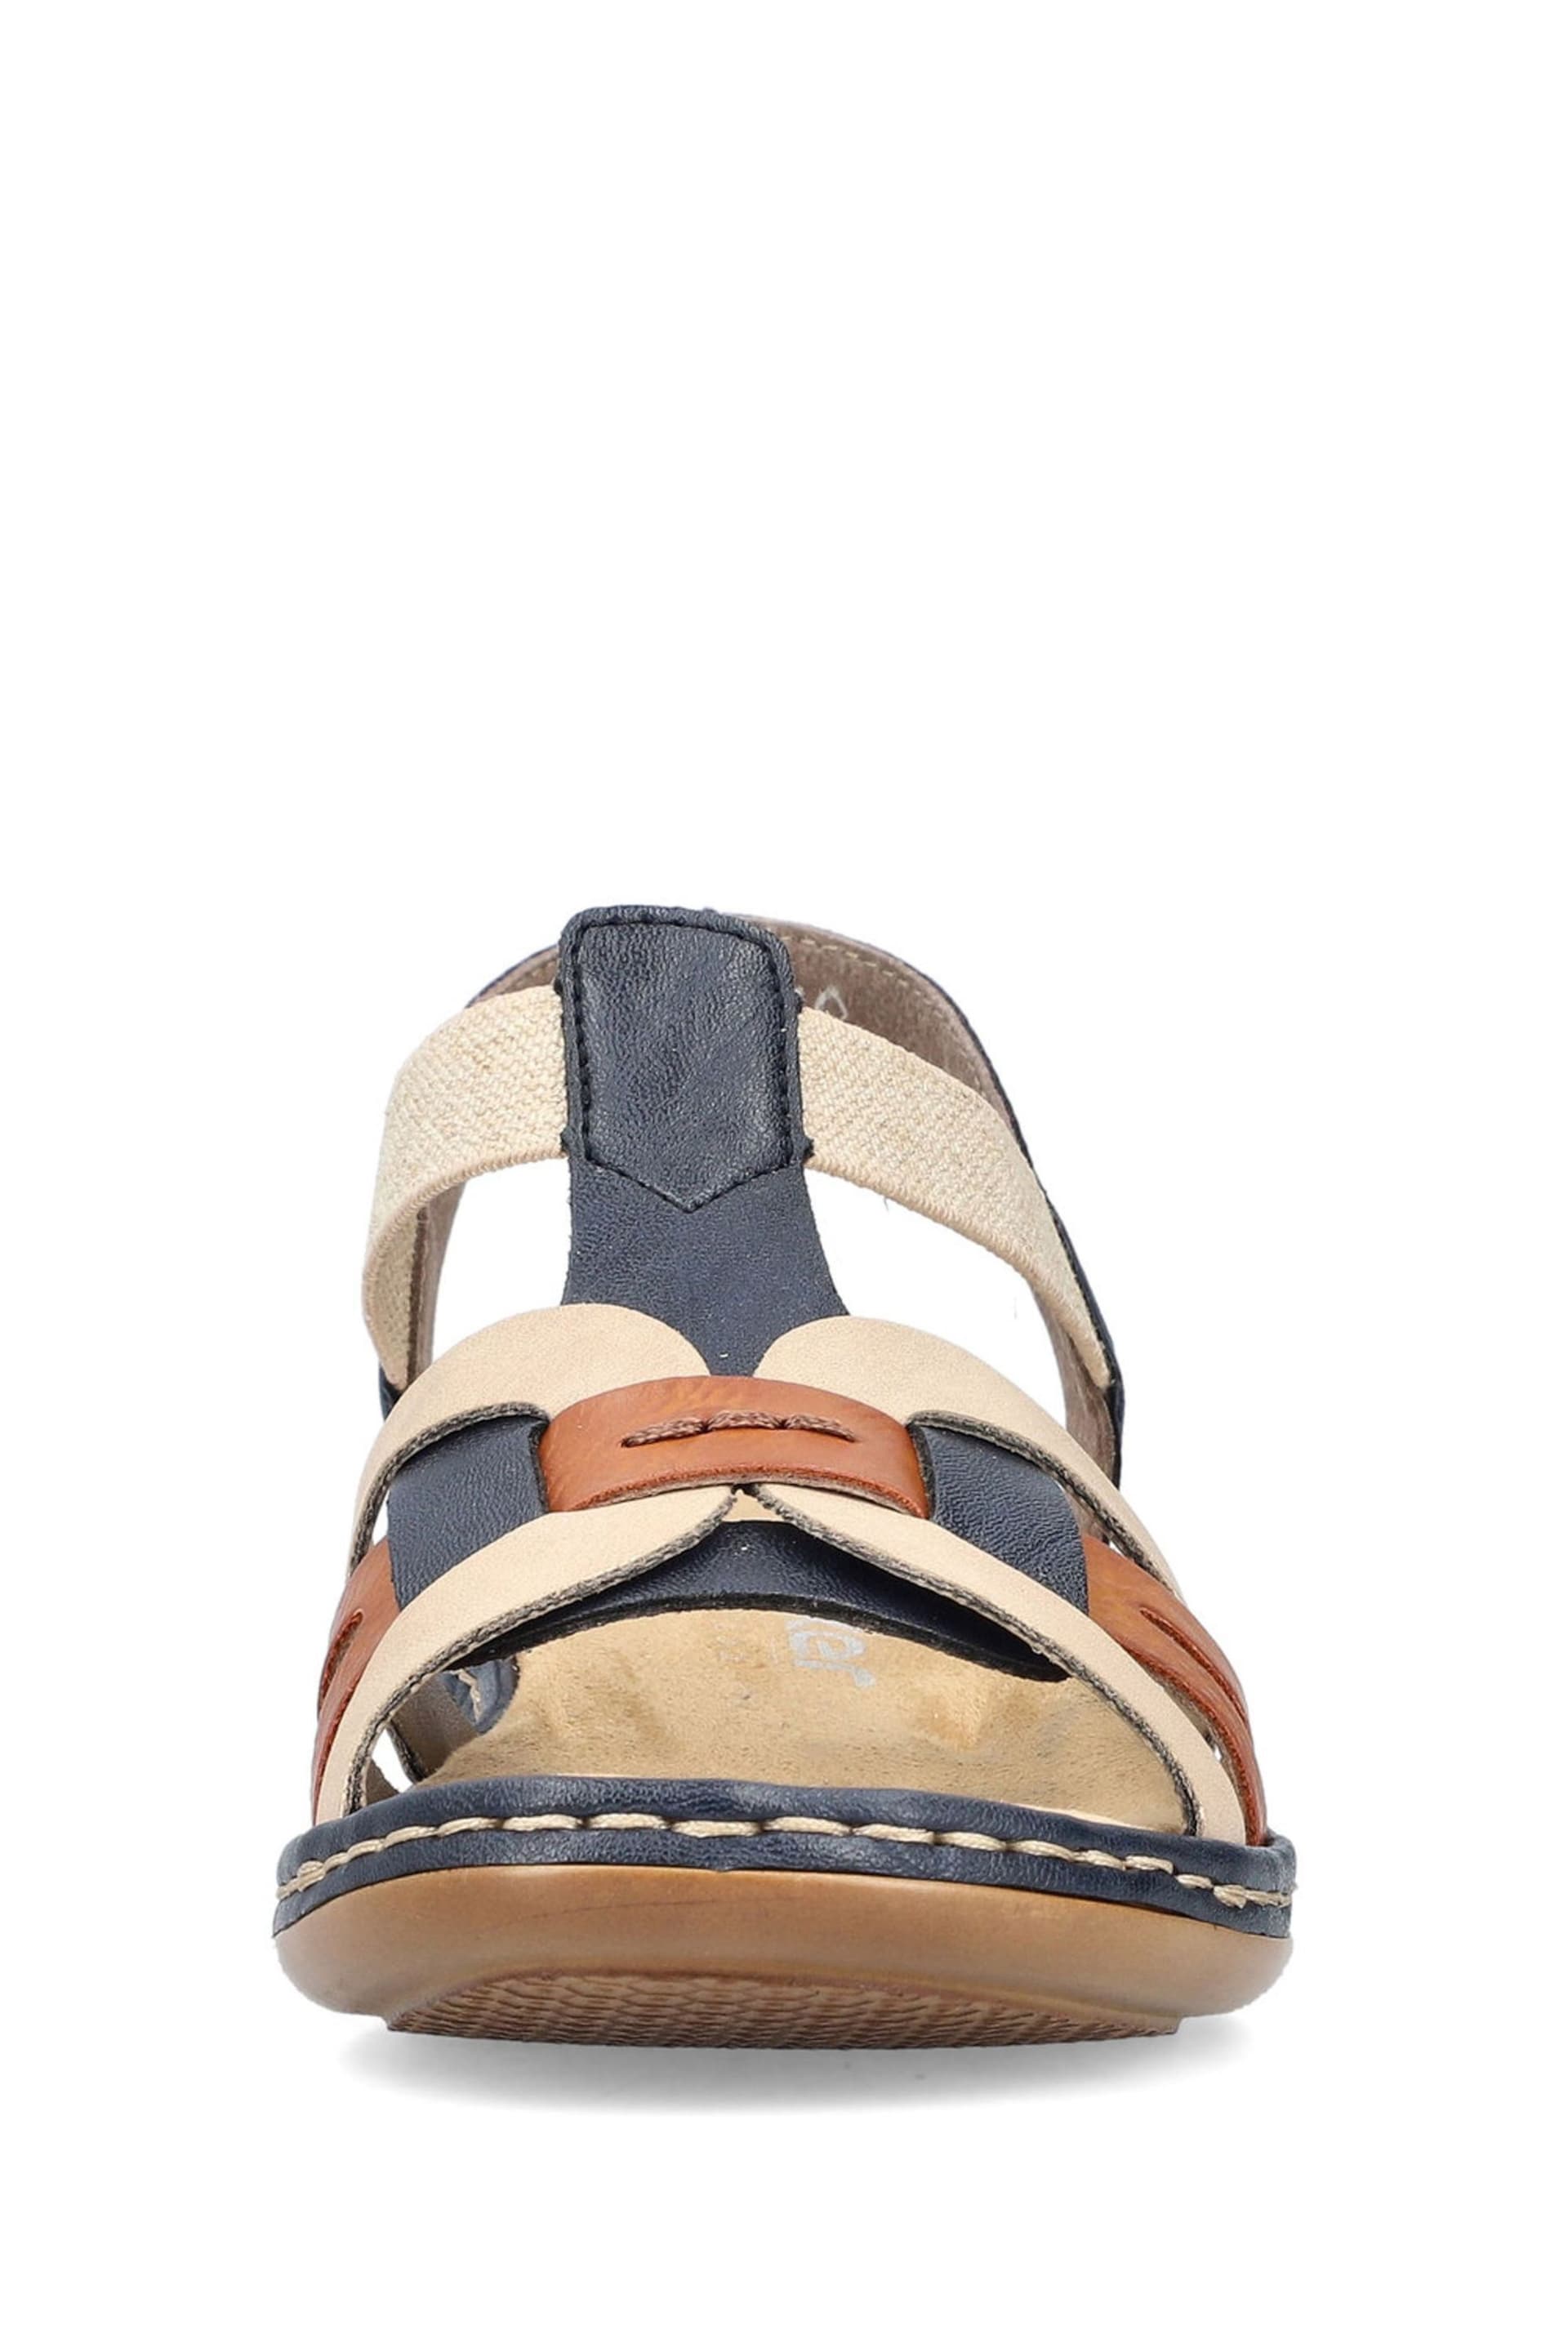 Rieker Womens Elastic Stretch Sandals - Image 6 of 10